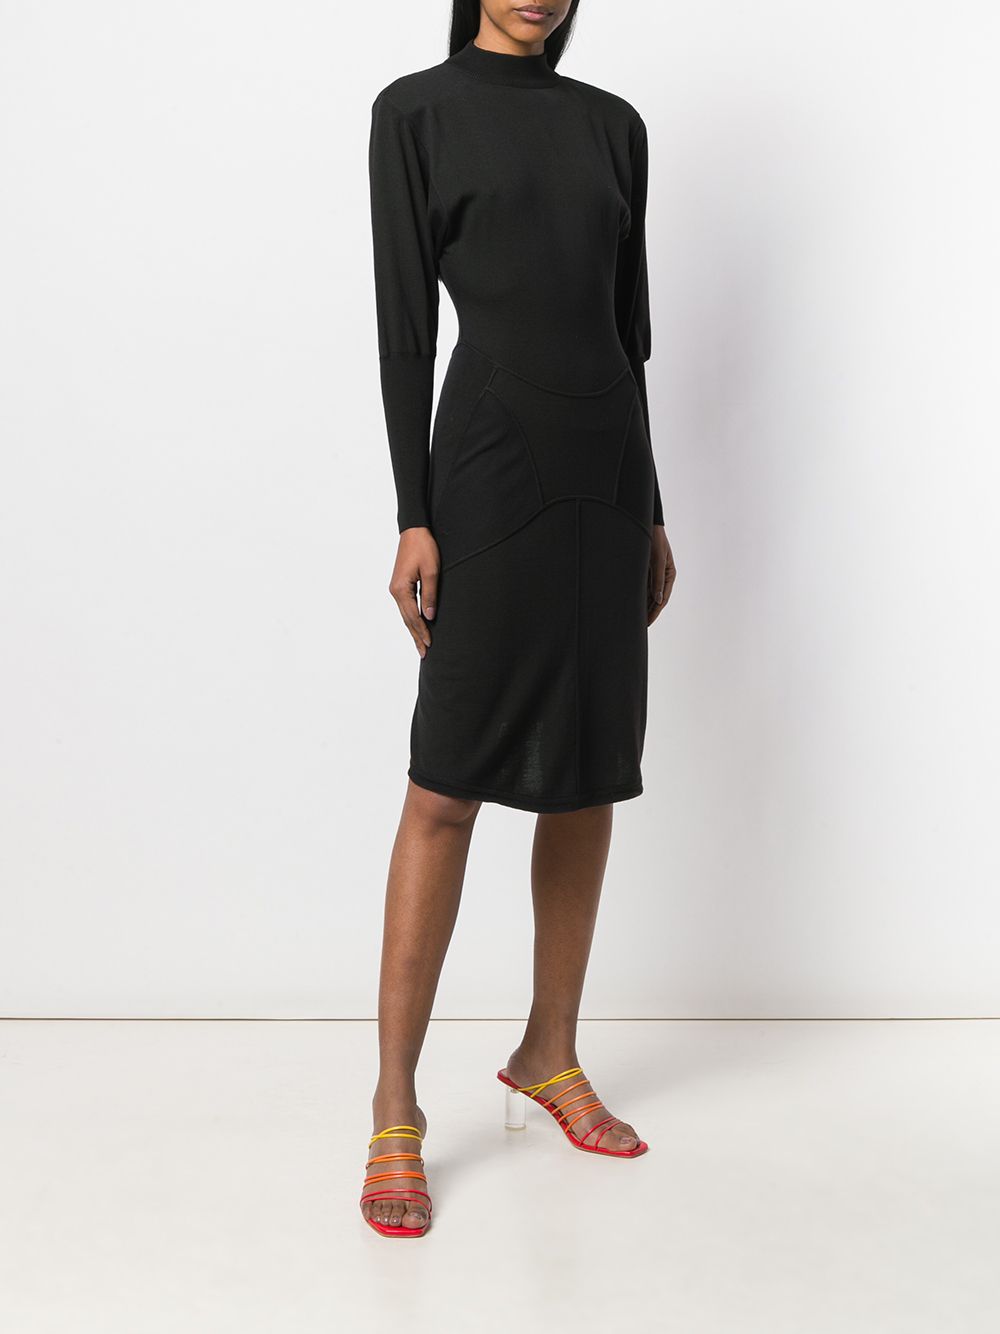 Alaïa Pre-Owned Fitted Short Dress - Farfetch